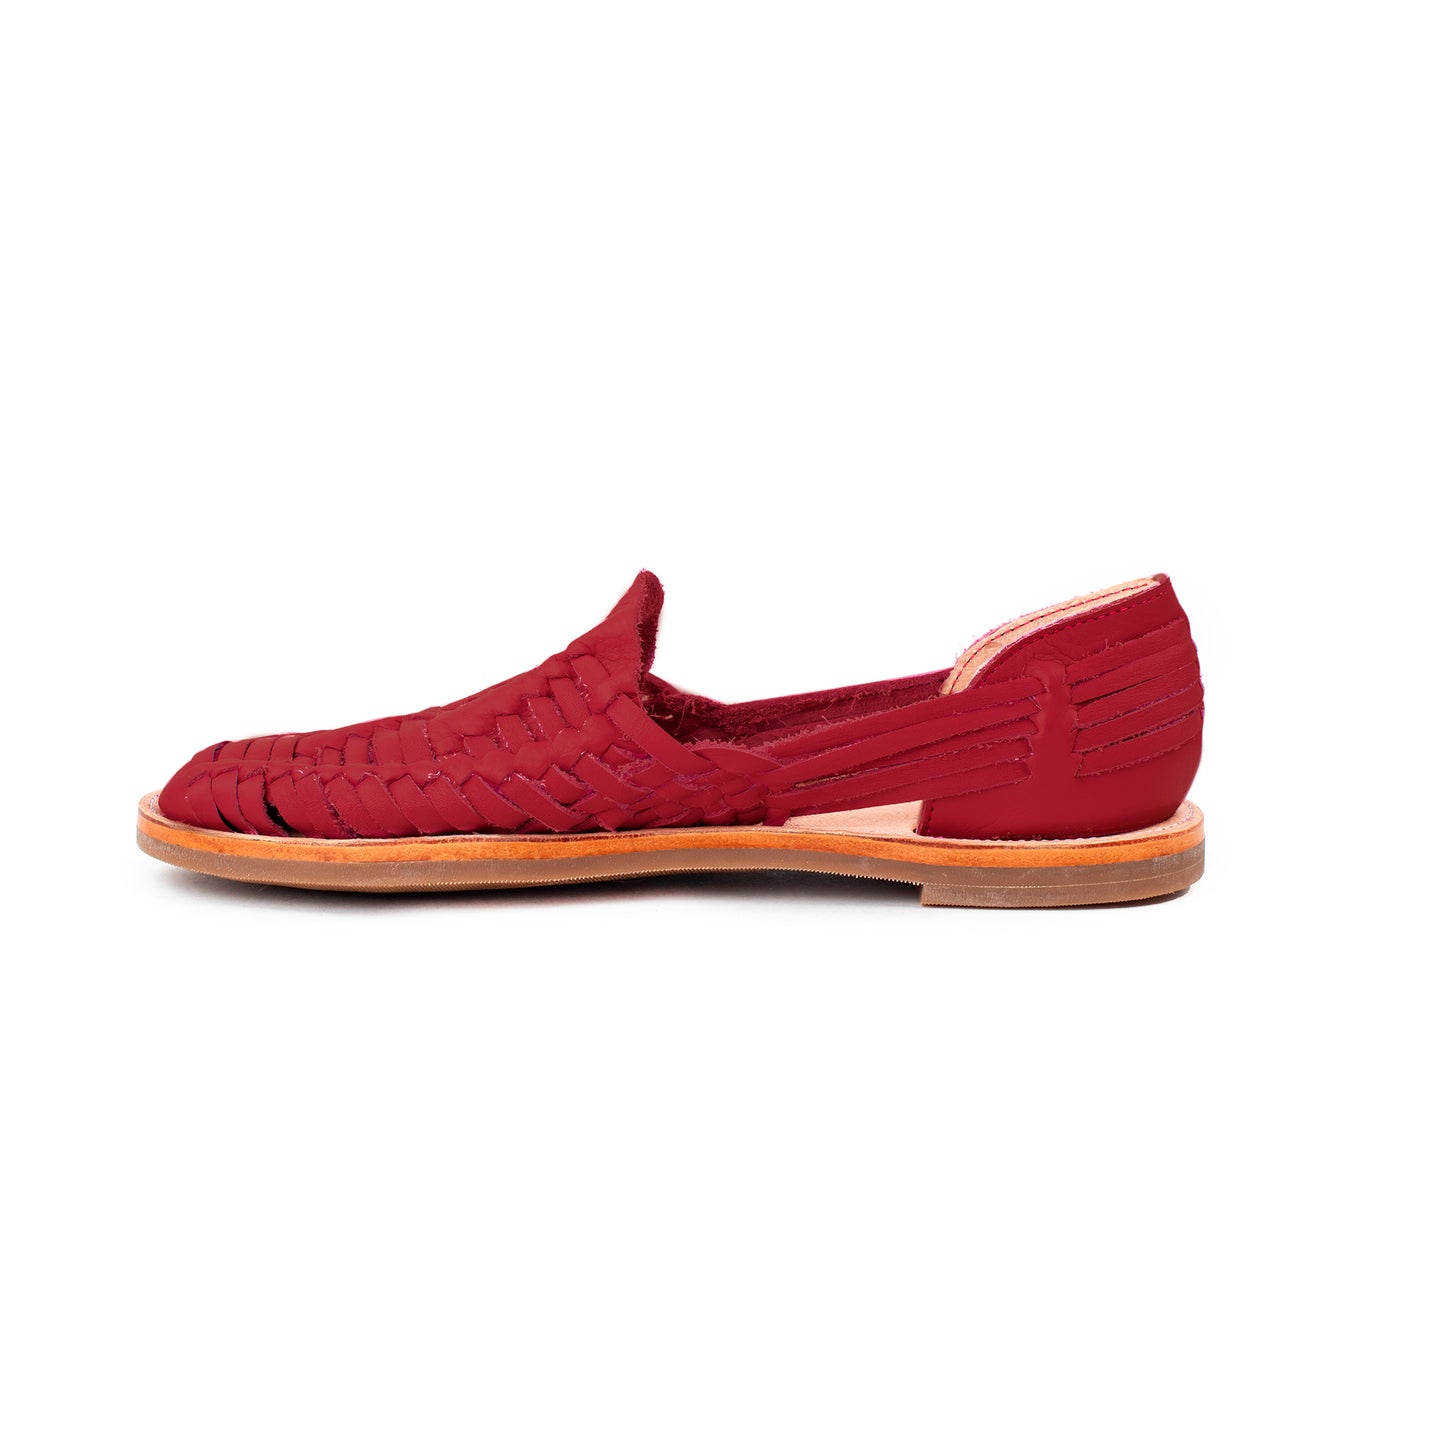 HUARACHES LOAFERS - ROUGE LEATHER